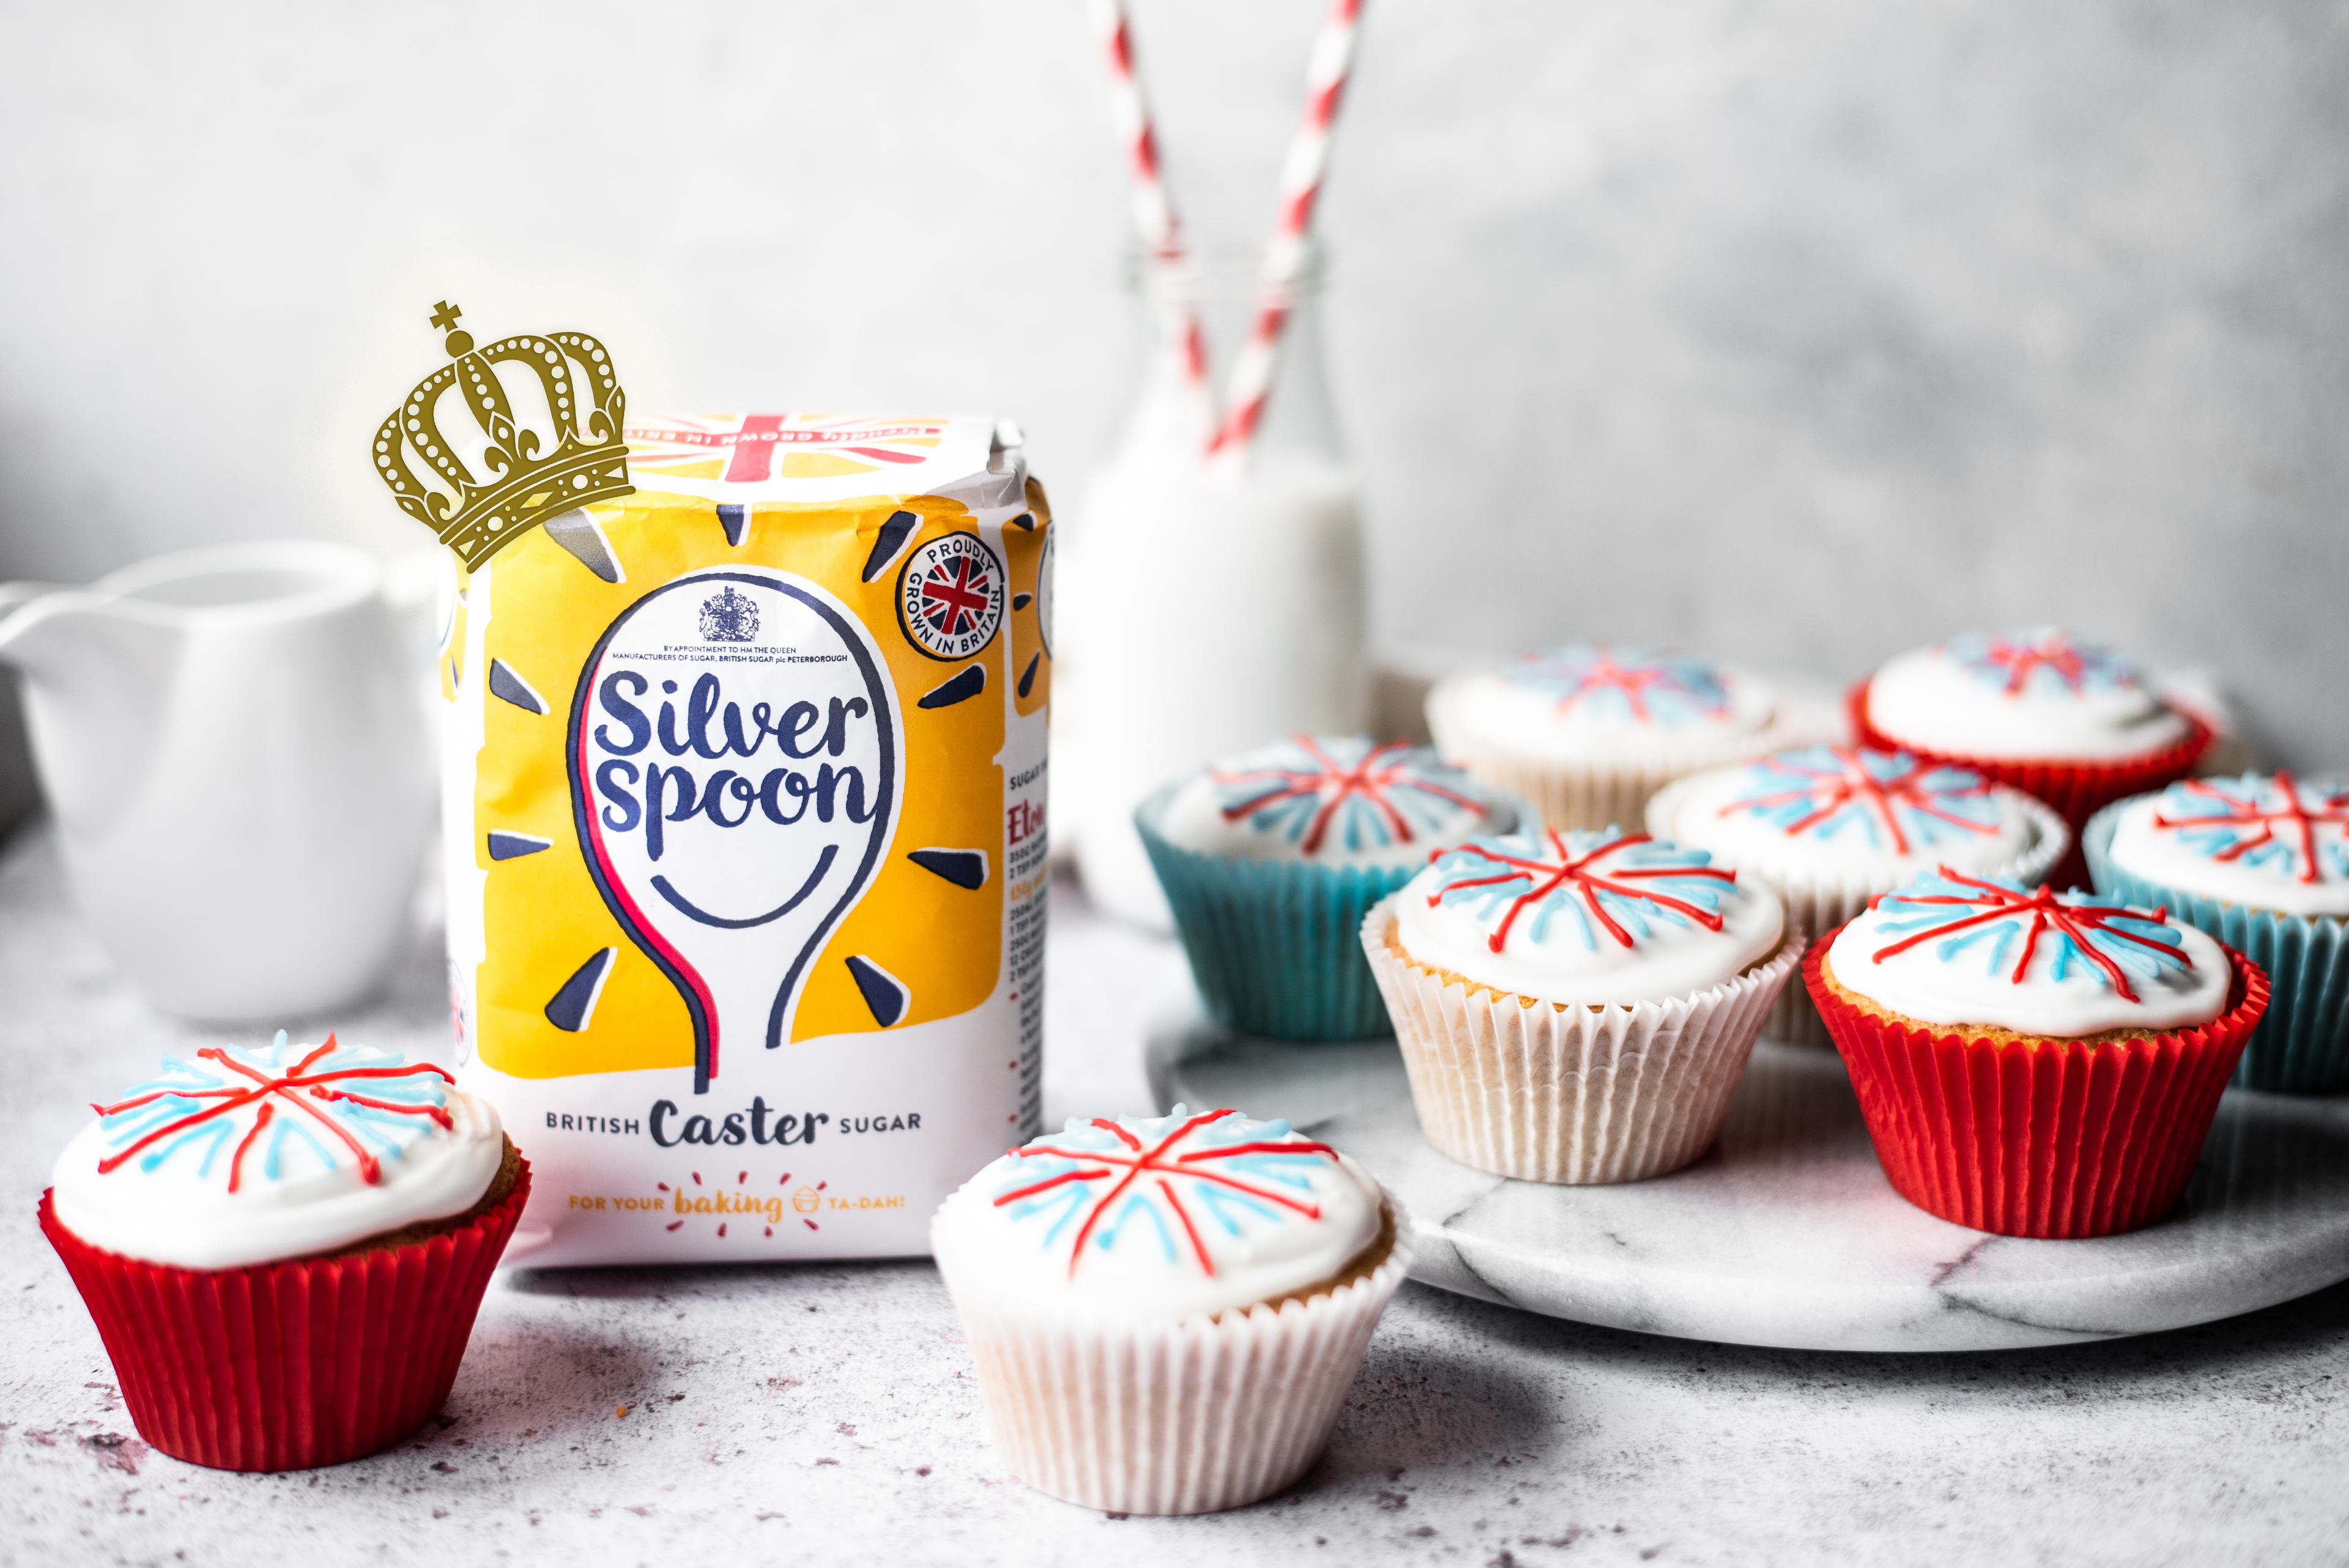 Union jack cupcakes, next to a bag of Silver Spoon caster sugar, with a hidden royal crown logo